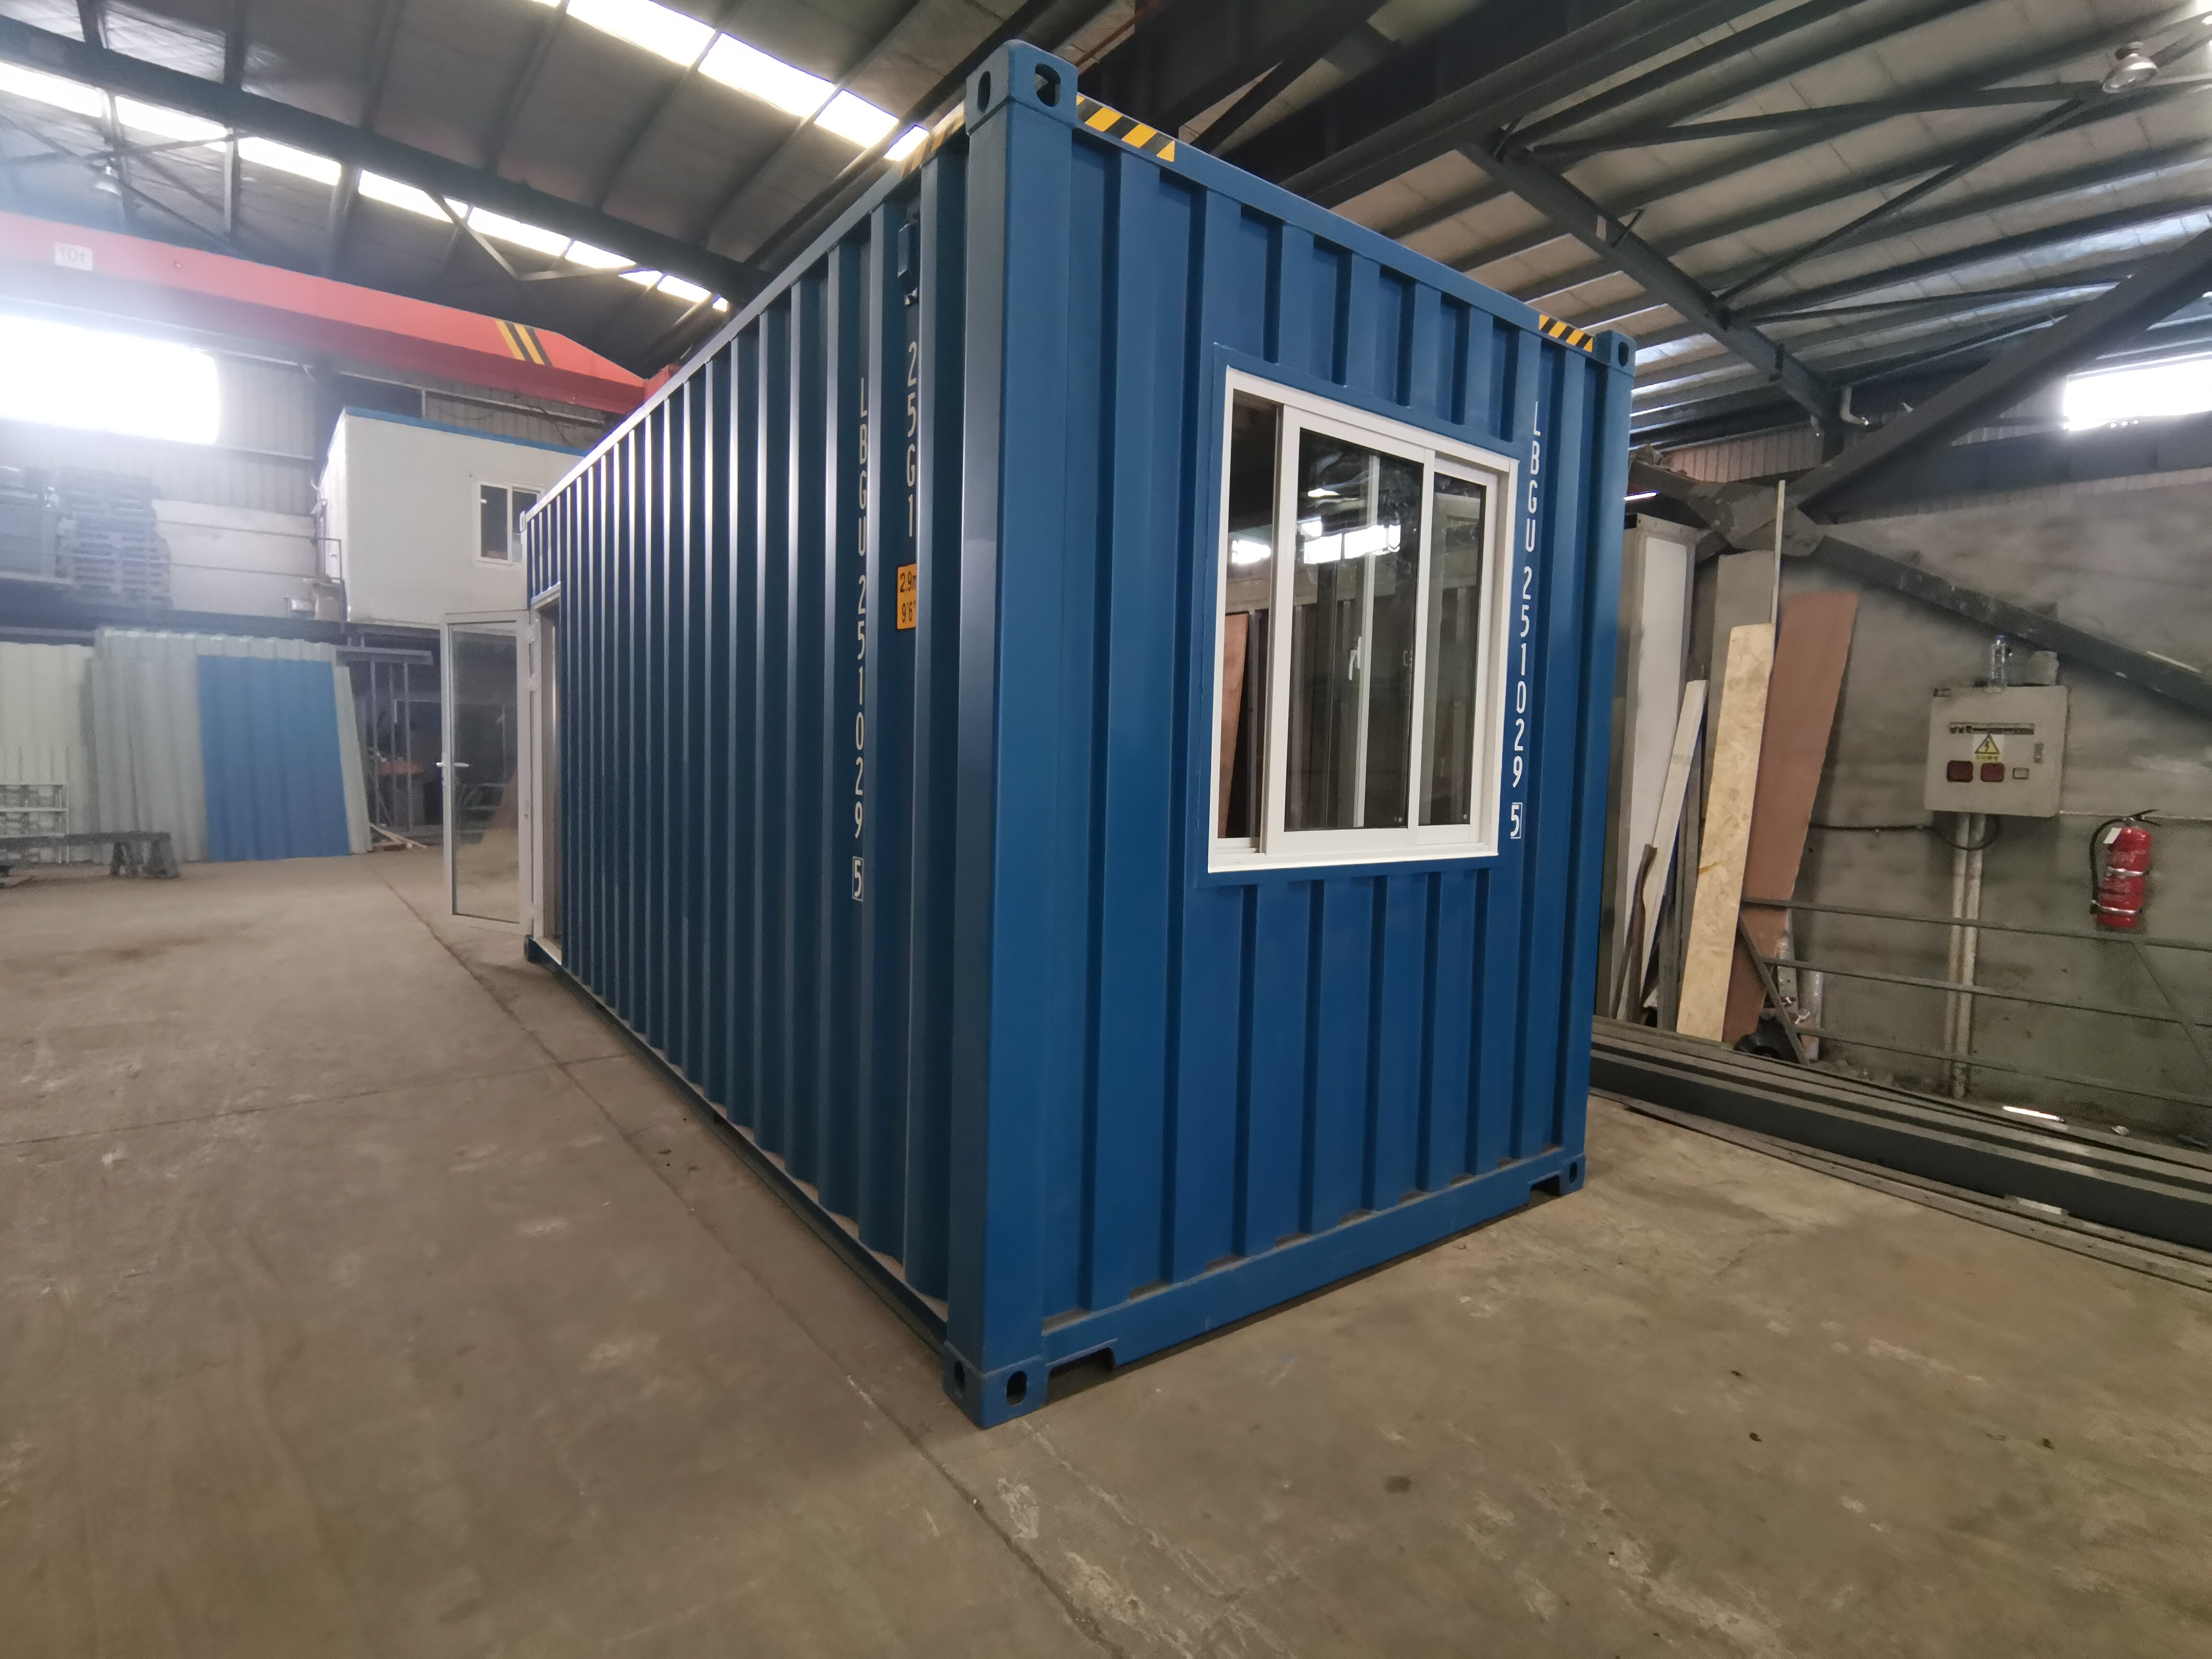 usa 20ft contianer house oem, usa 20ft contianer house odm, usa 20ft contianer house customize, usa contianer export, usa contianer china